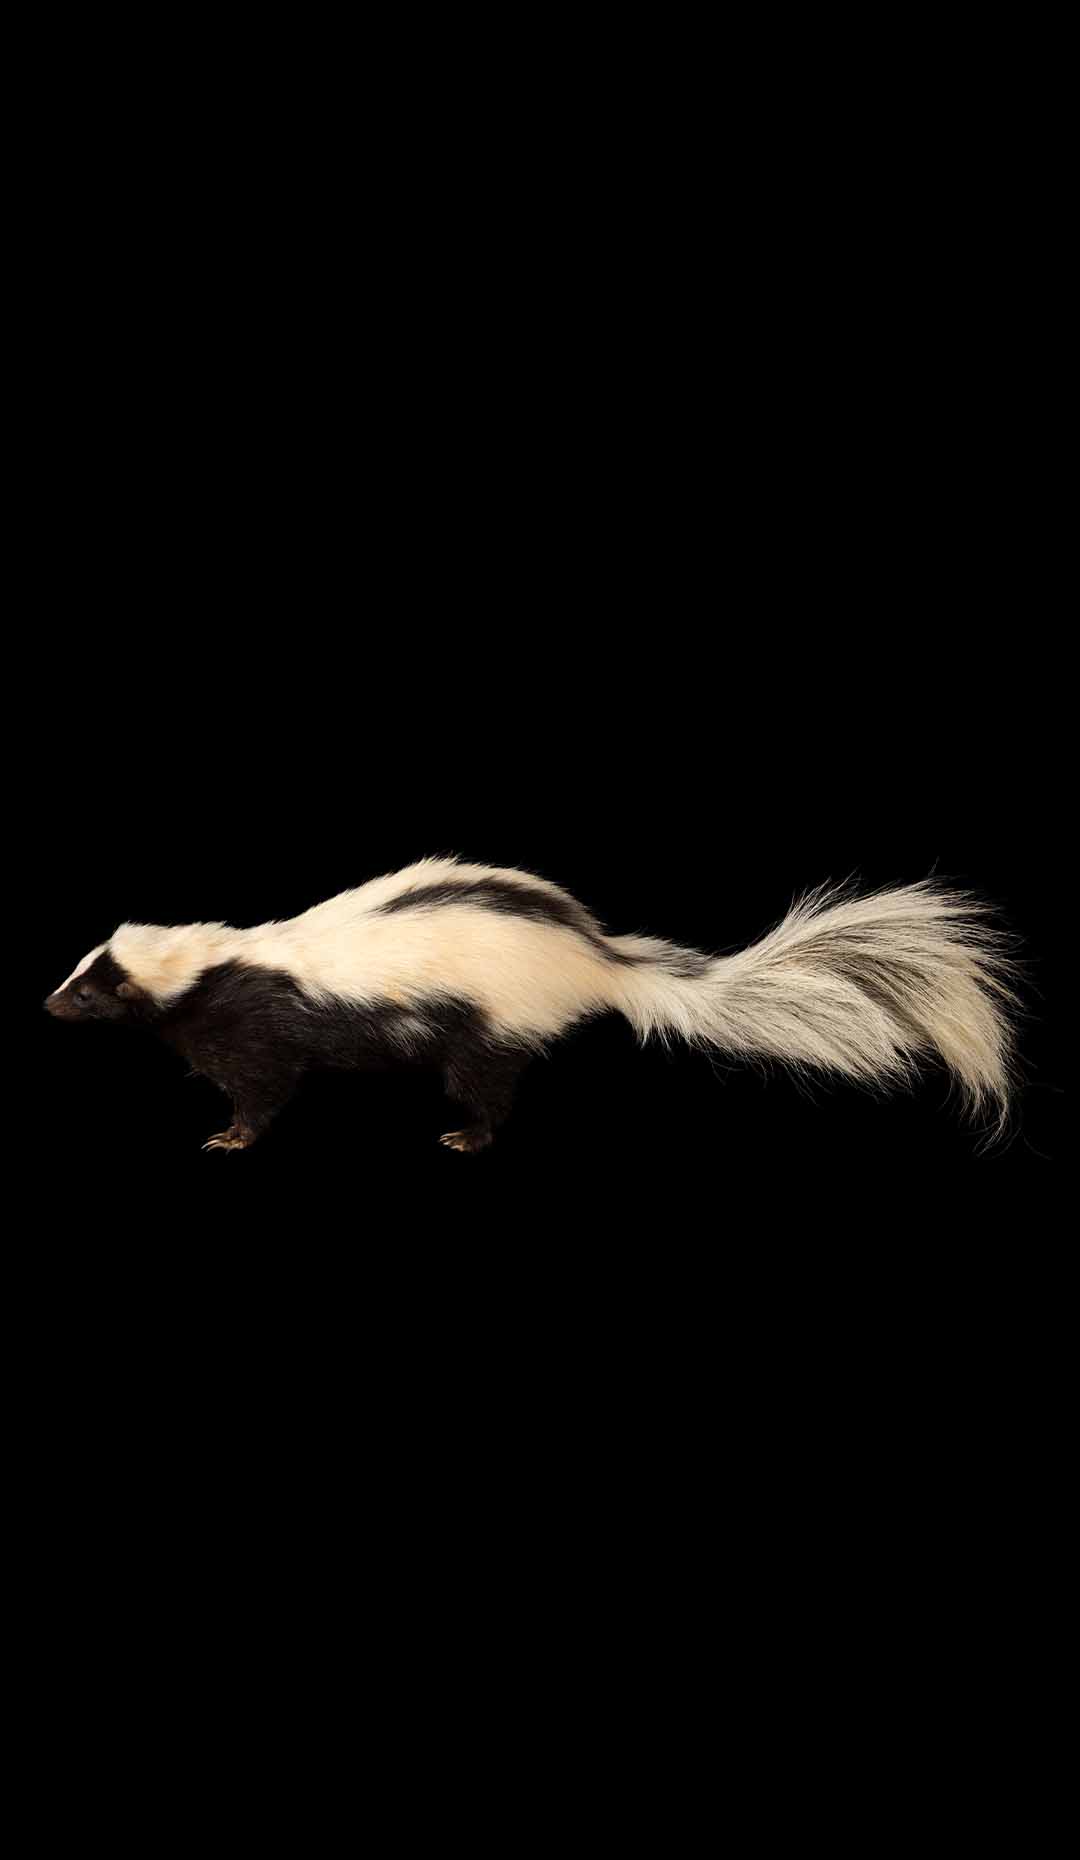 Charming Pepe le Pew: Black and White Taxidermy Skunk Delight